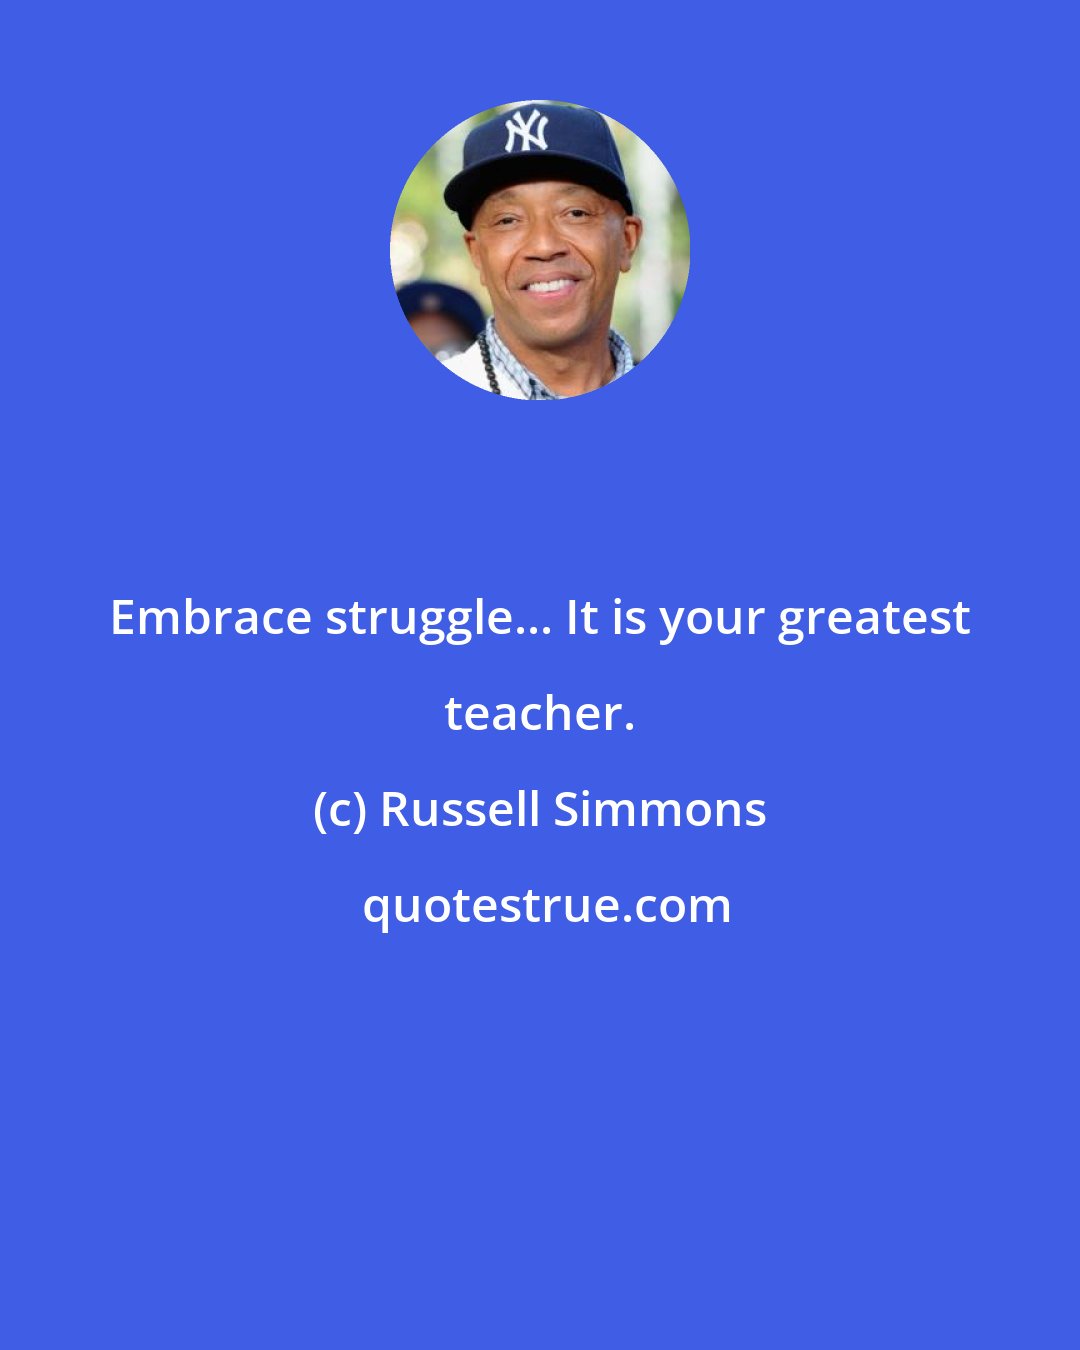 Russell Simmons: Embrace struggle... It is your greatest teacher.